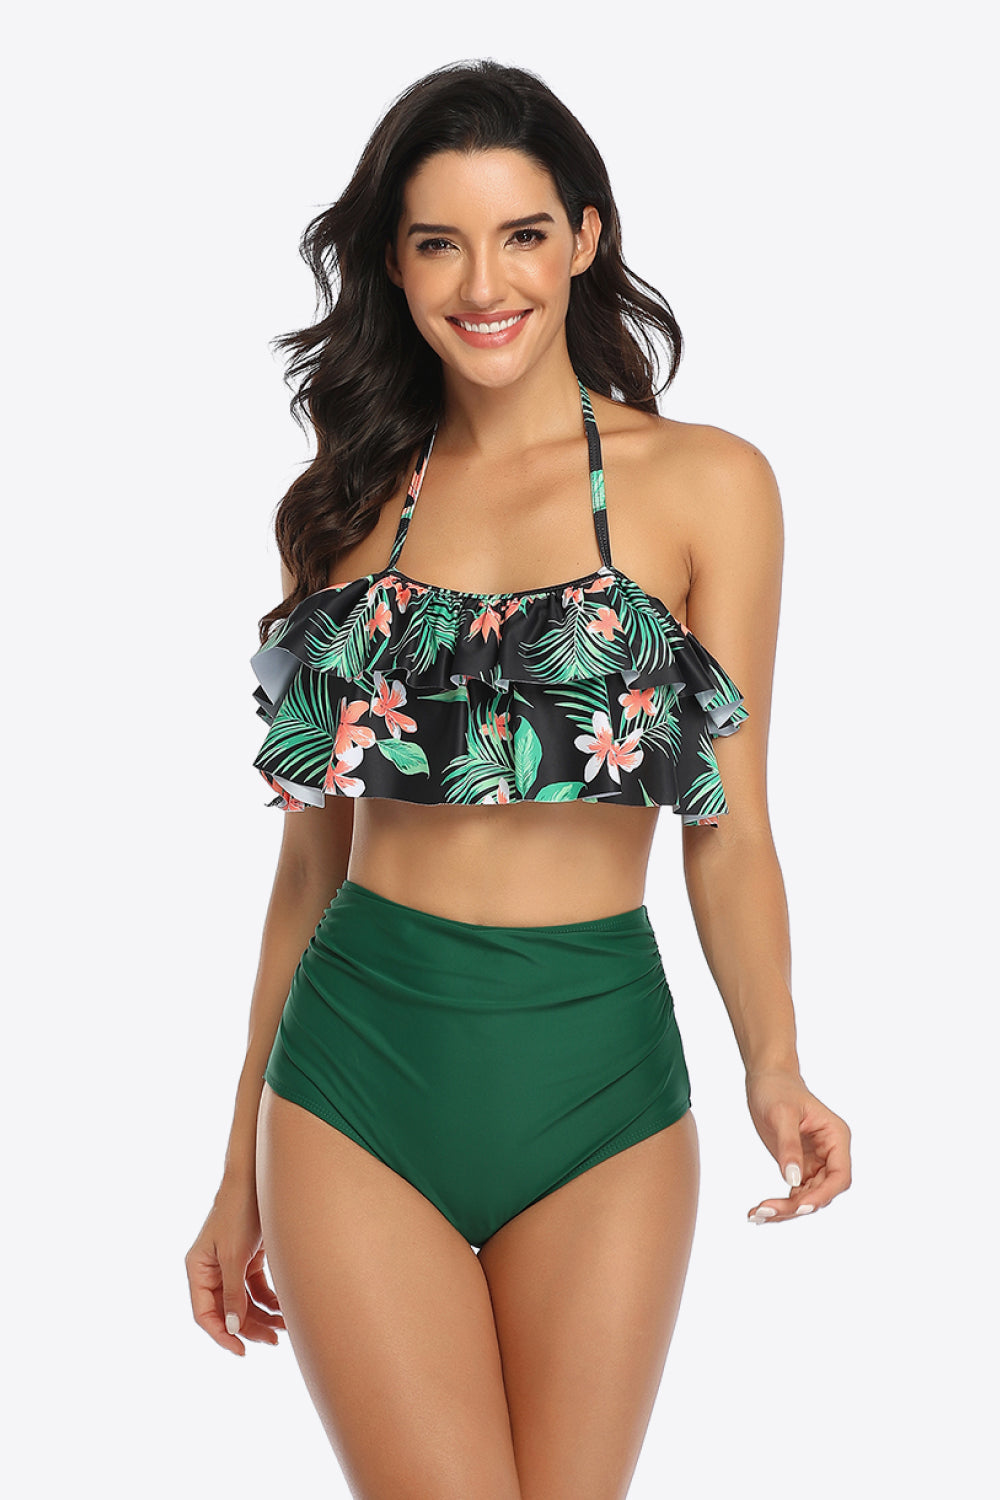 Elevate beach style with our Ruffled Halter Two-Piece Swimsuit. Perfect fit, fun ruffles, tropical vibe. Ideal for sun-soaked days!